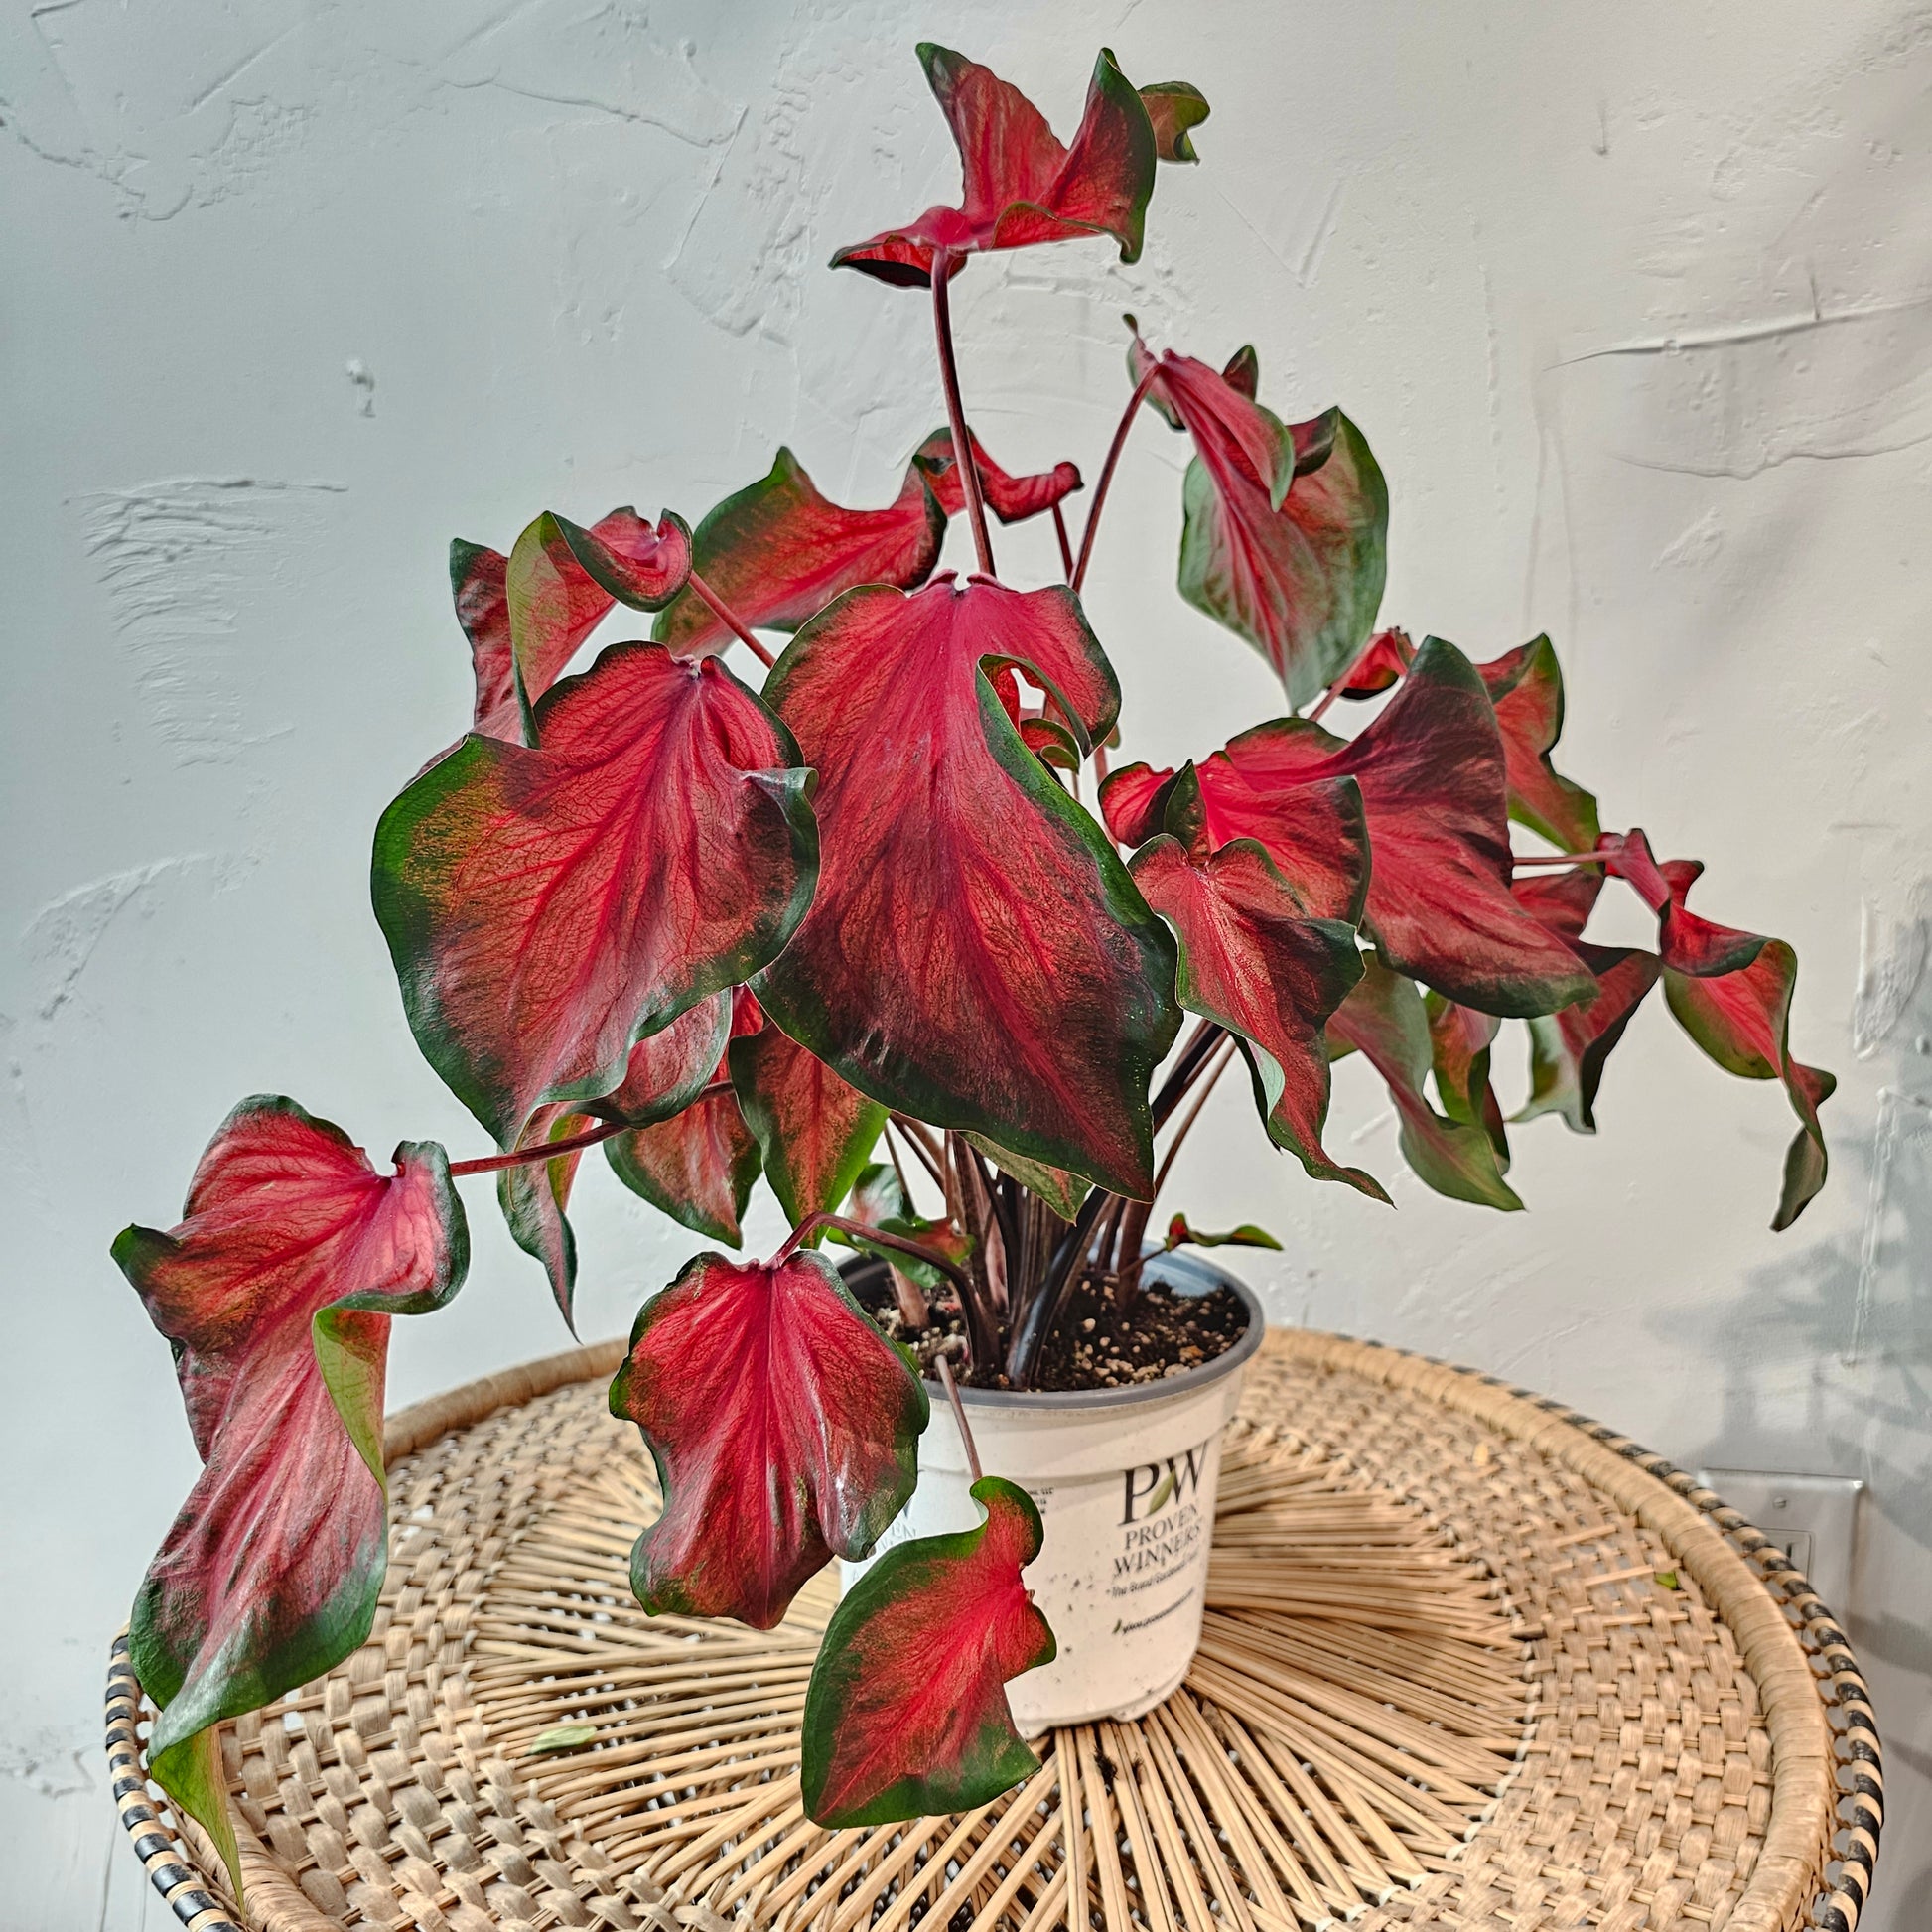 Hot 2 Trot Caladium (Caladium 'Hot 2 Trot) in a 2 inch pot. Indoor plant for sale by Promise Supply for delivery and pickup in Toronto